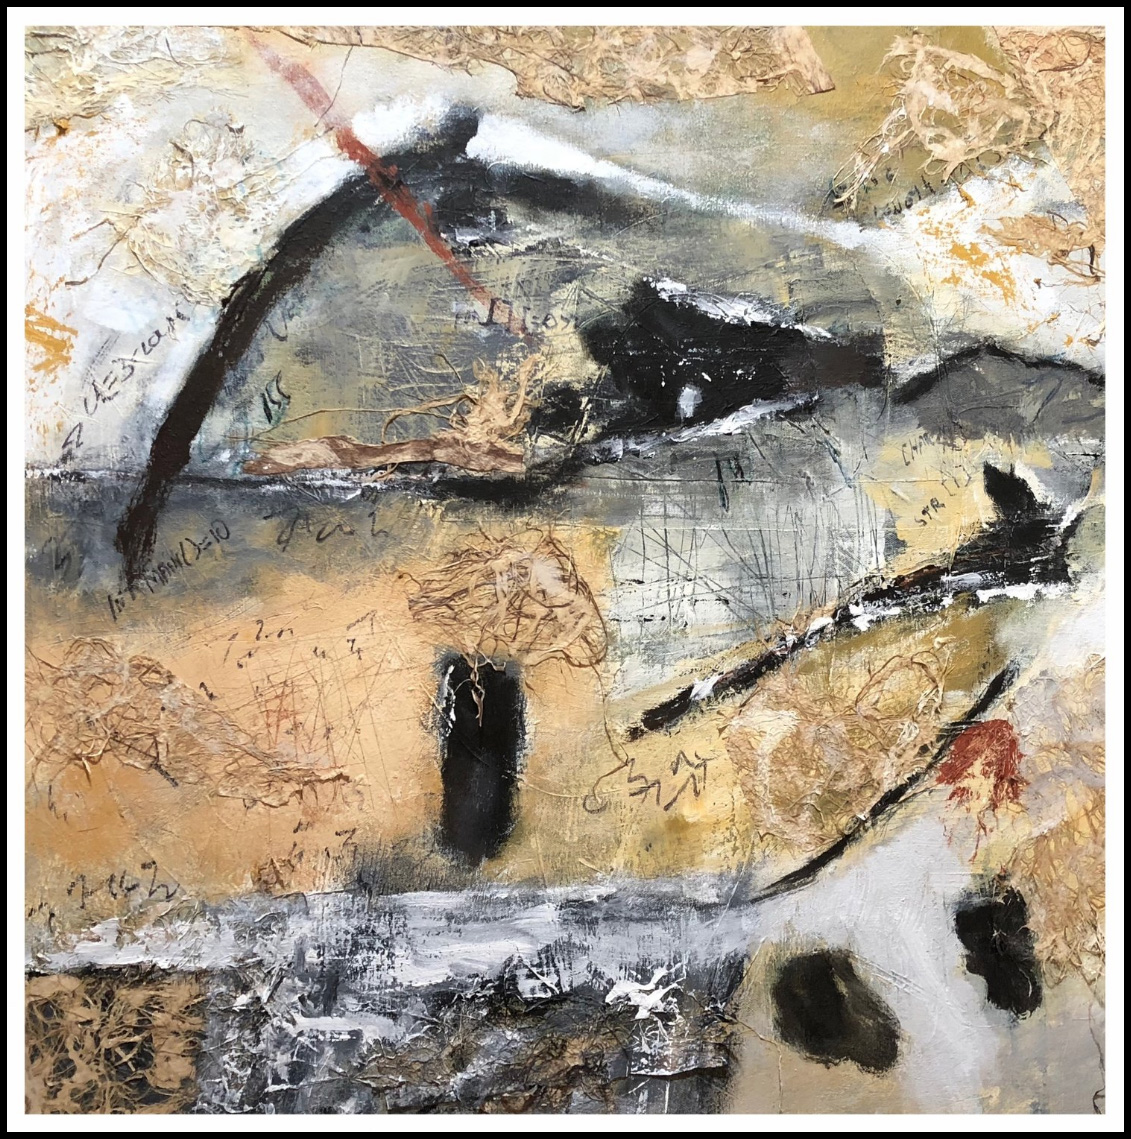   LITERARY NATURE   30”x 30” acrylic, collage, charcoal on canvas, framed 